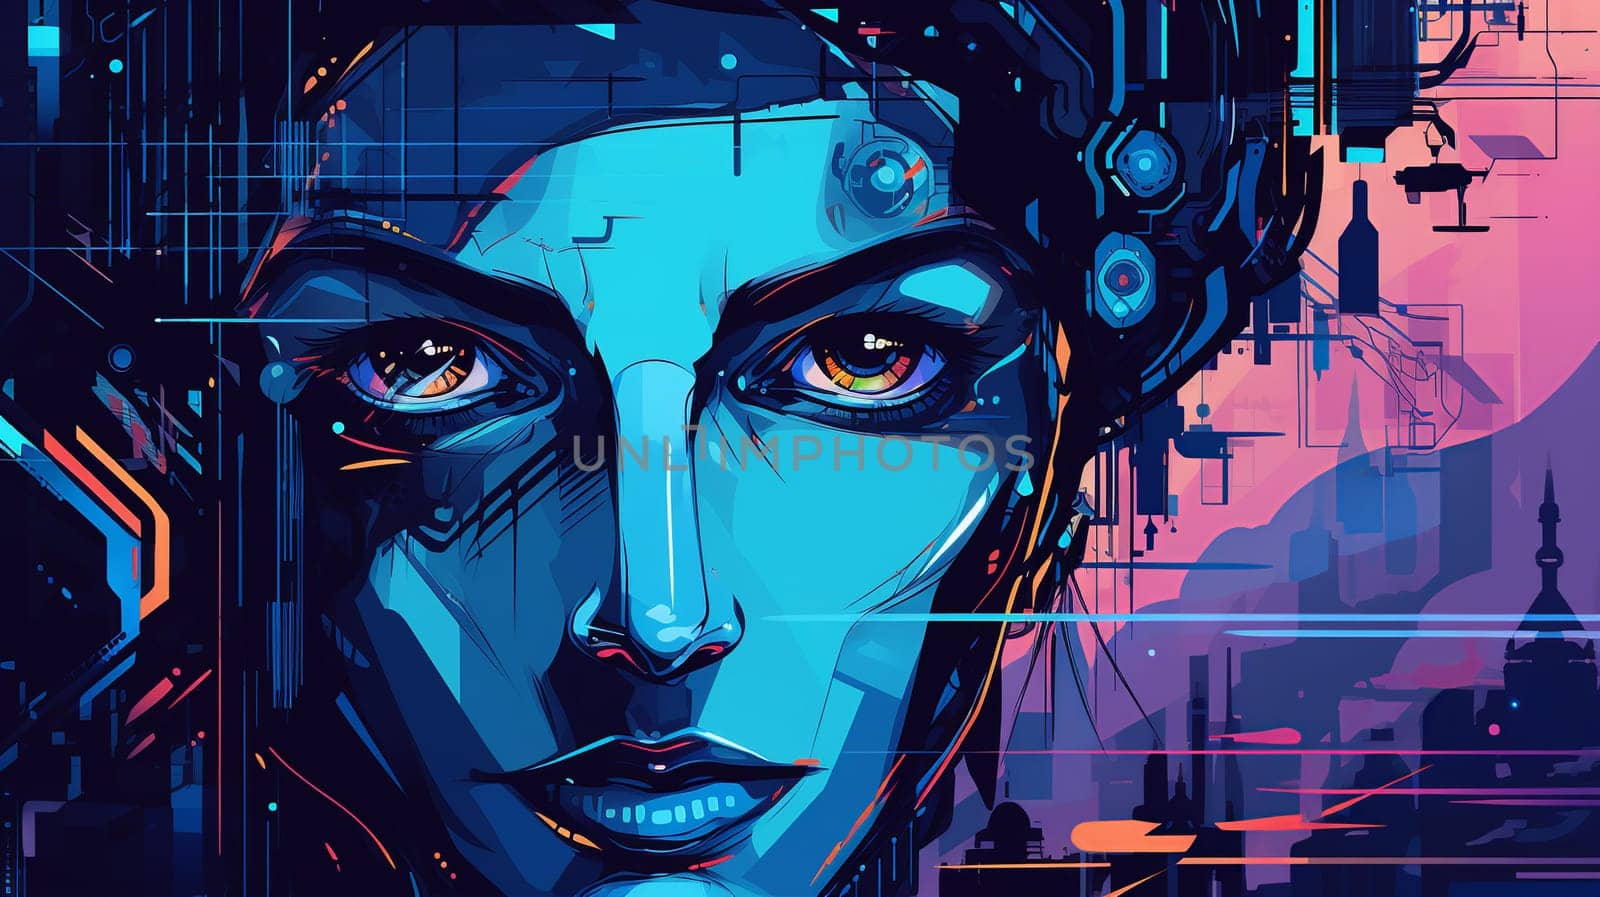 Robotic modern face Background  design graphic  Abstract cyberpunk landing page Generate AI